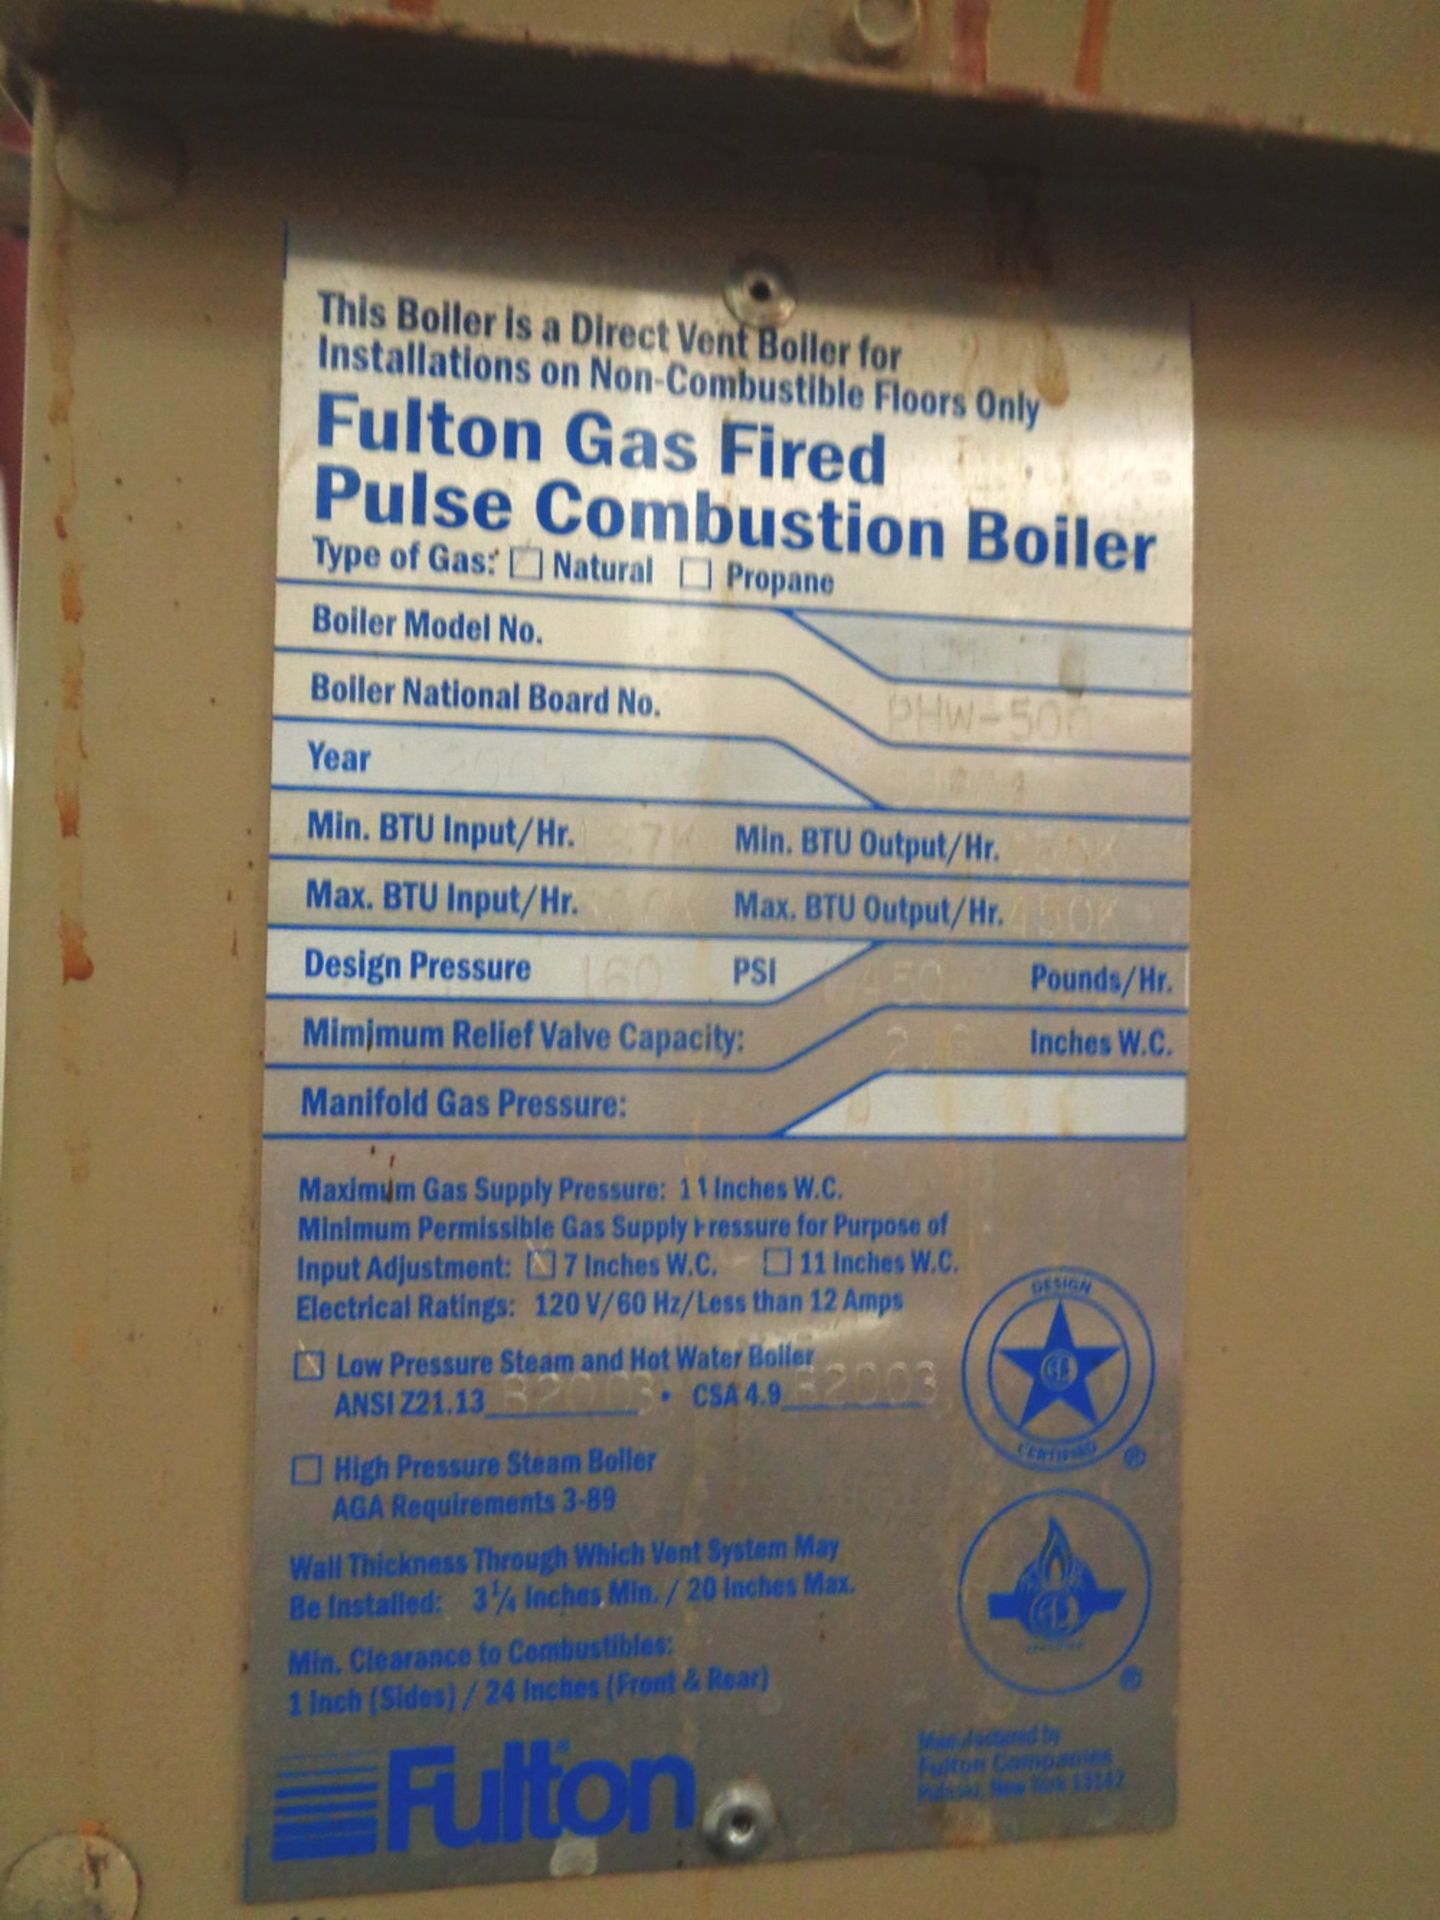 Fulton Gas Fired Pulse Combustion Boiler, Model PHW-500 - Image 5 of 5